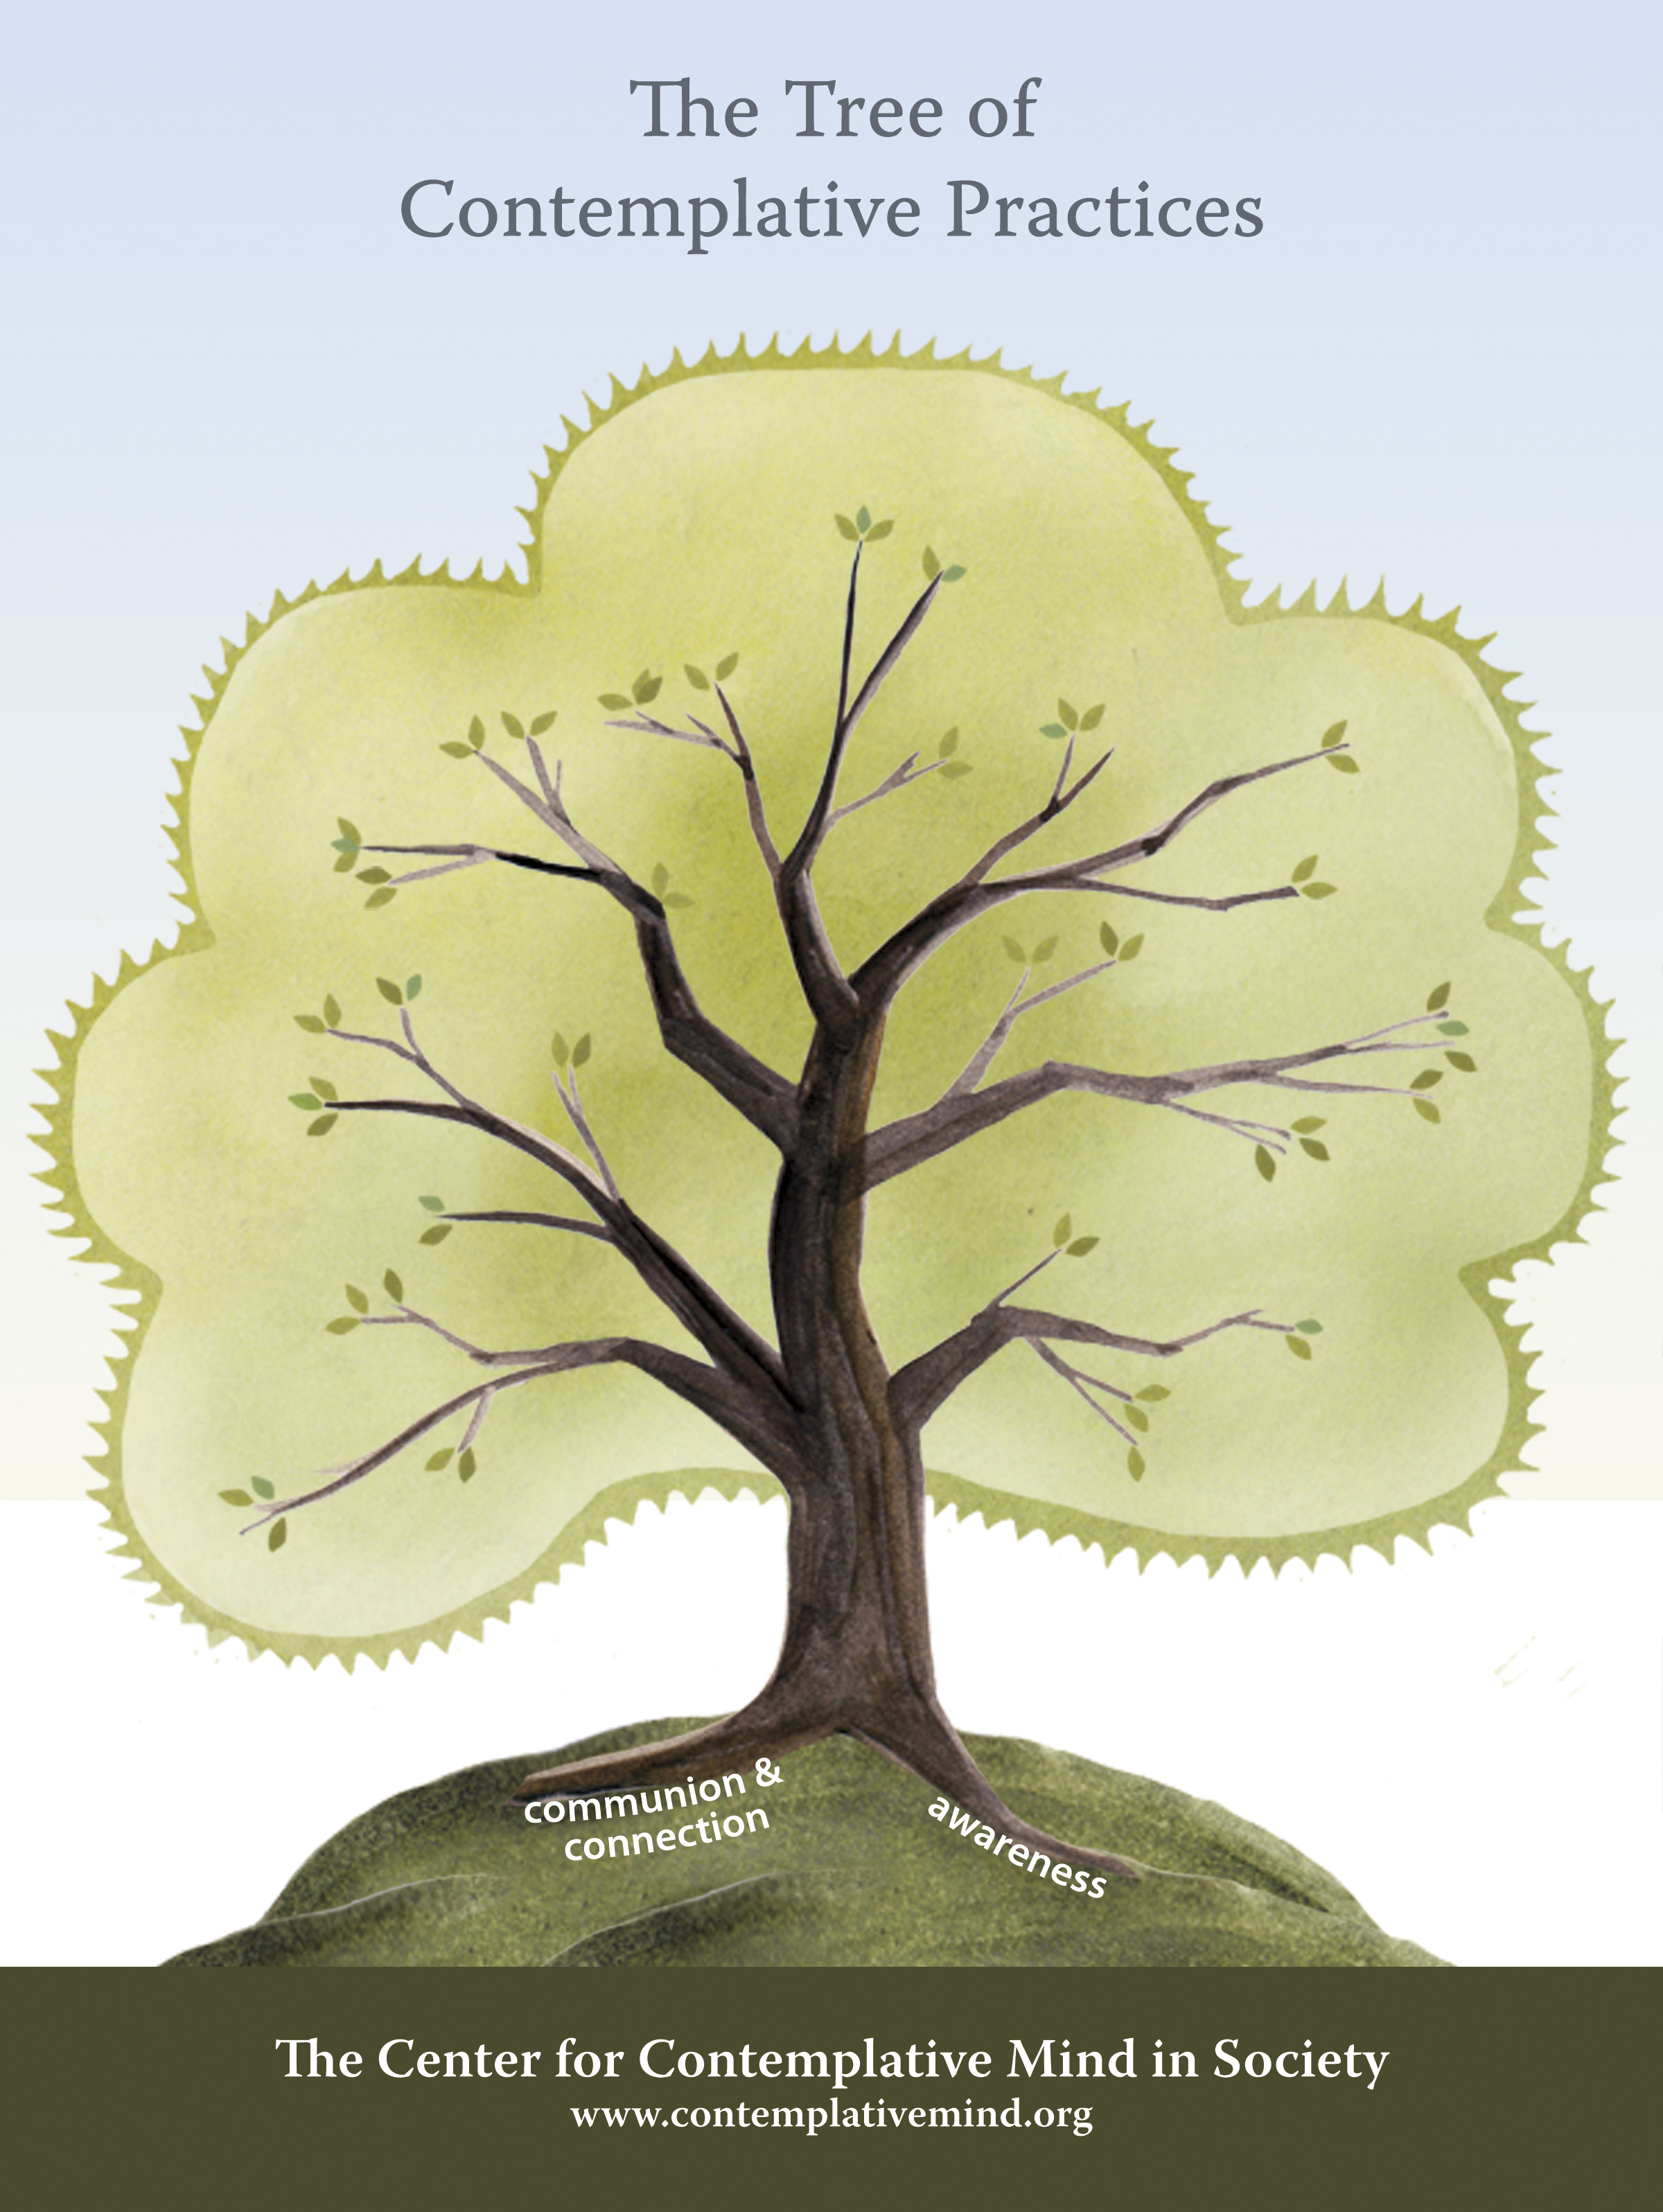 The Tree of Contemplative Practices | The Center for Contemplative ...